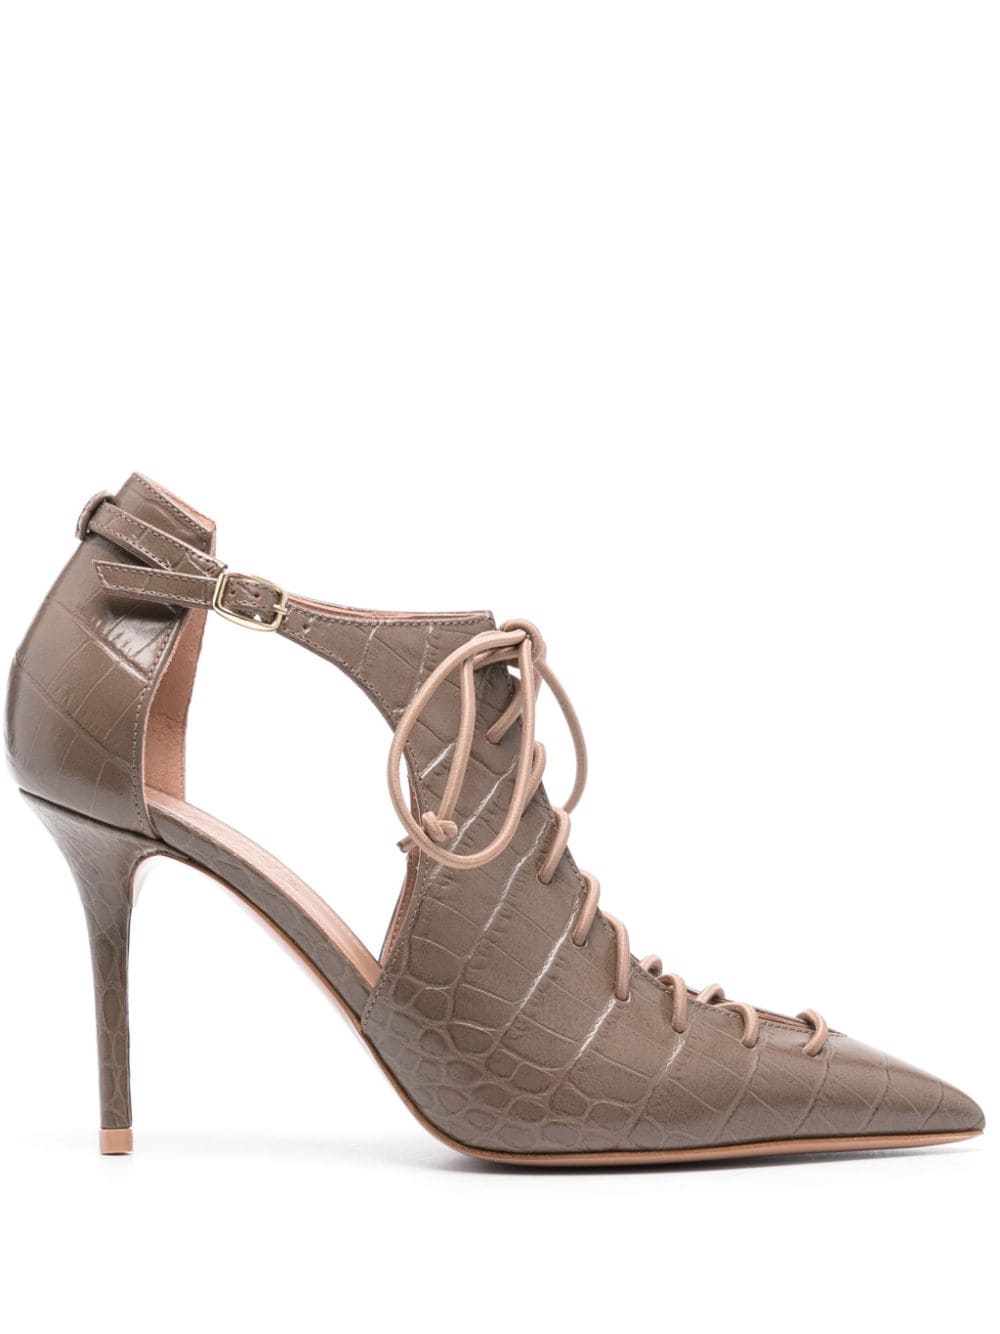 Malone Souliers Montana Pumps 85mm - Nude von Malone Souliers